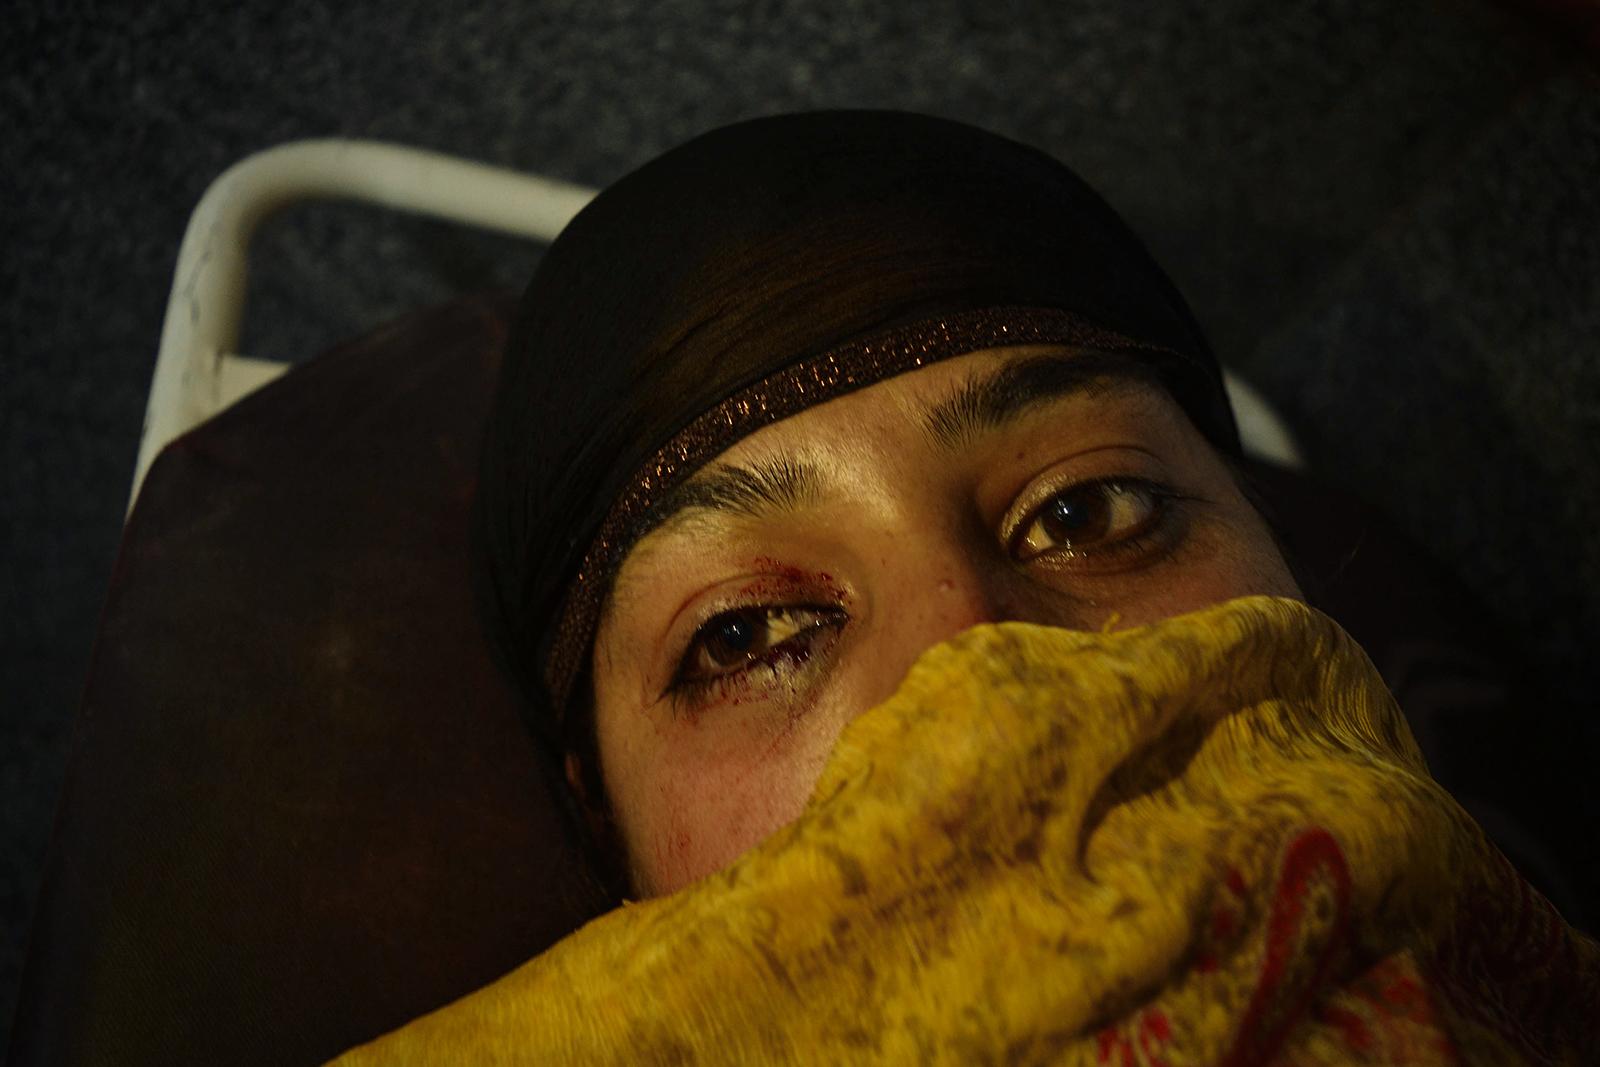 Kashmir-The Never Ending War - . Mysar, 26, looks while reclining on a stretcher at...